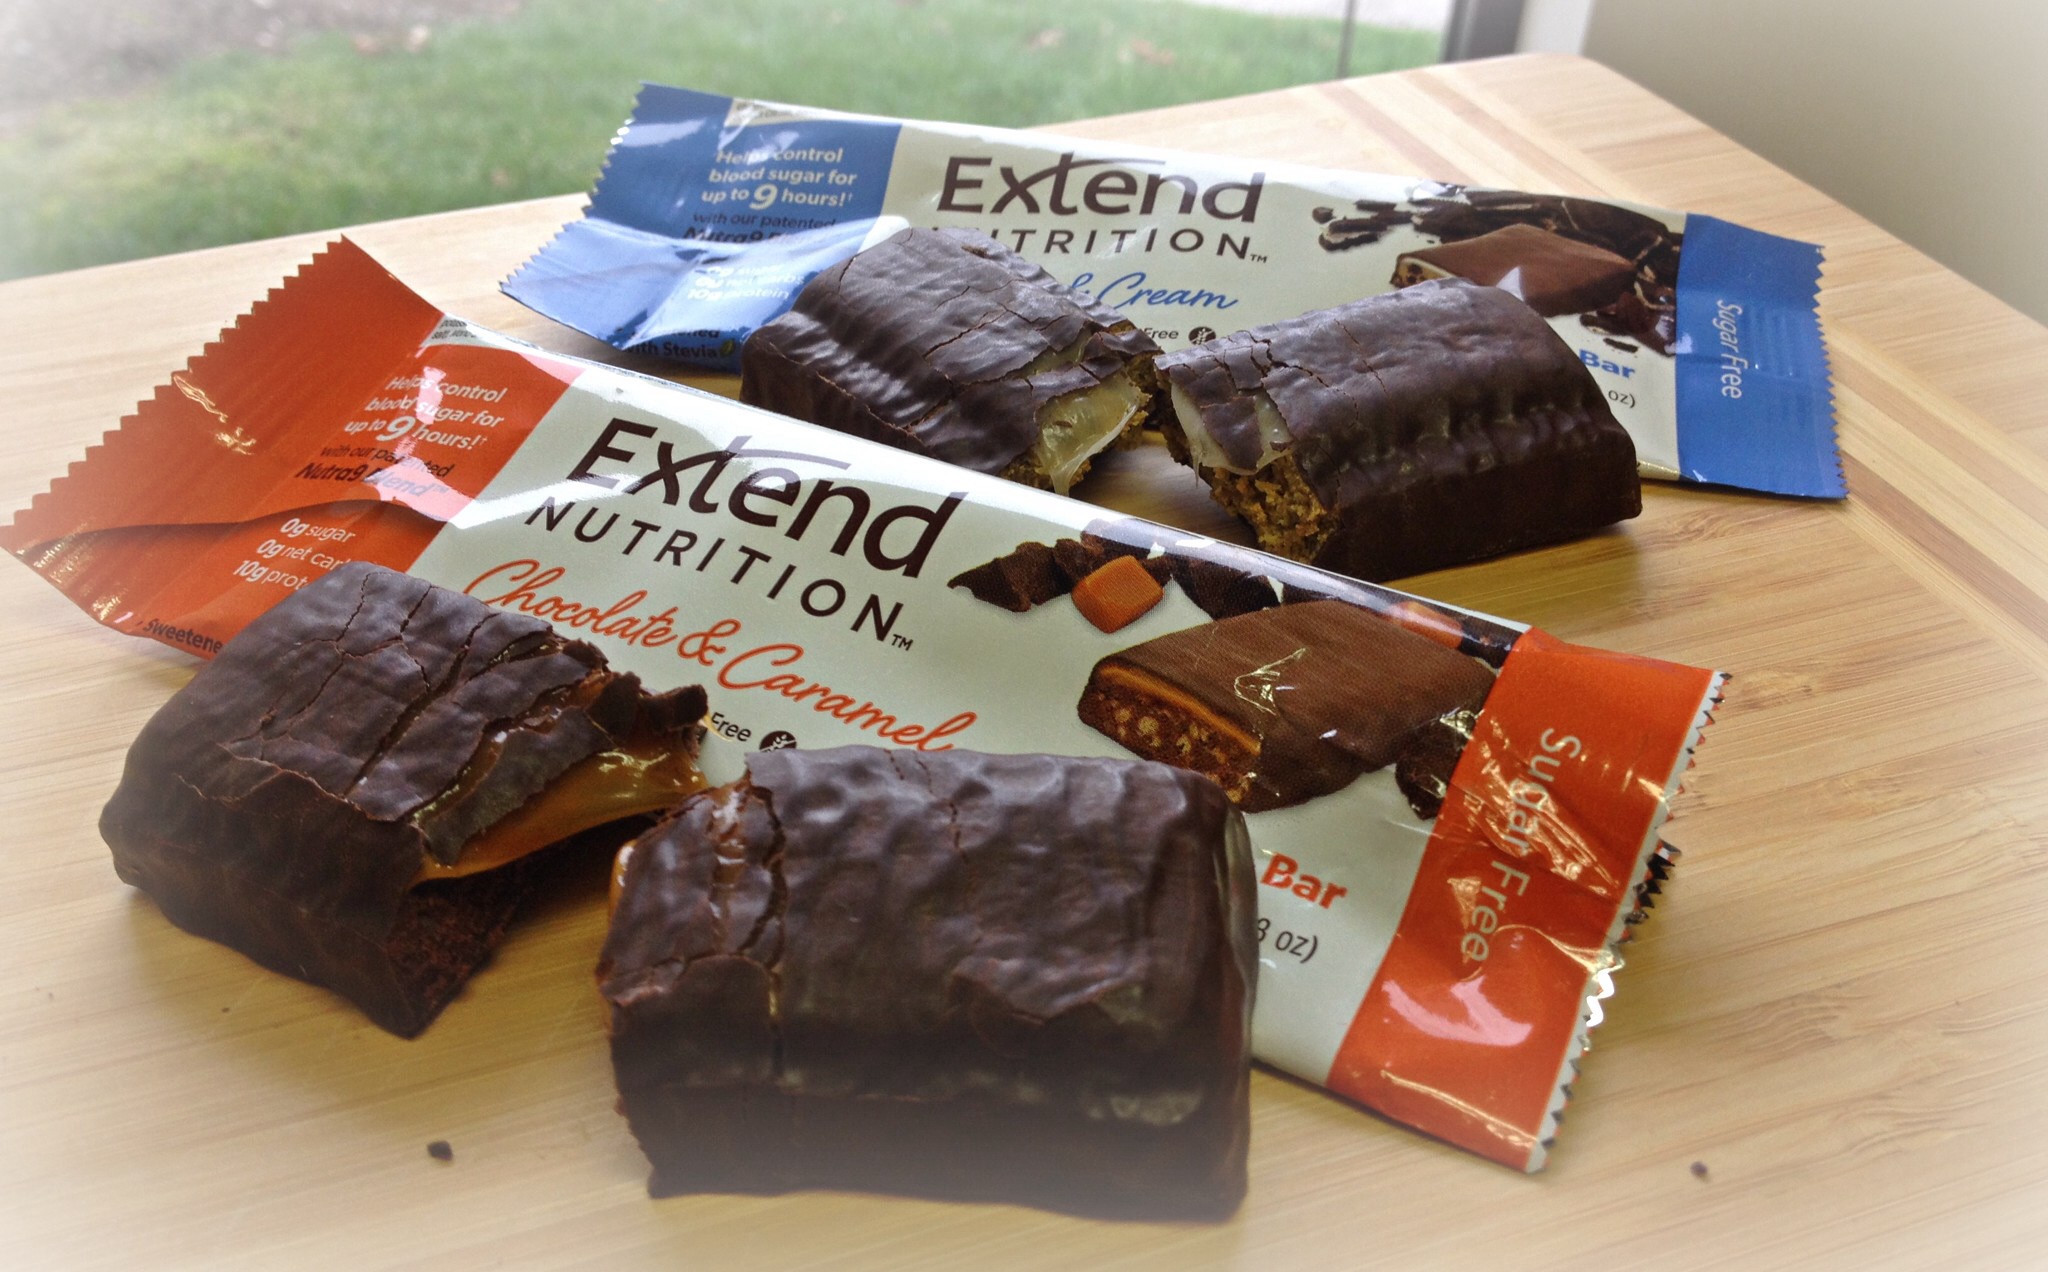 New flavors from Extend Nutrition